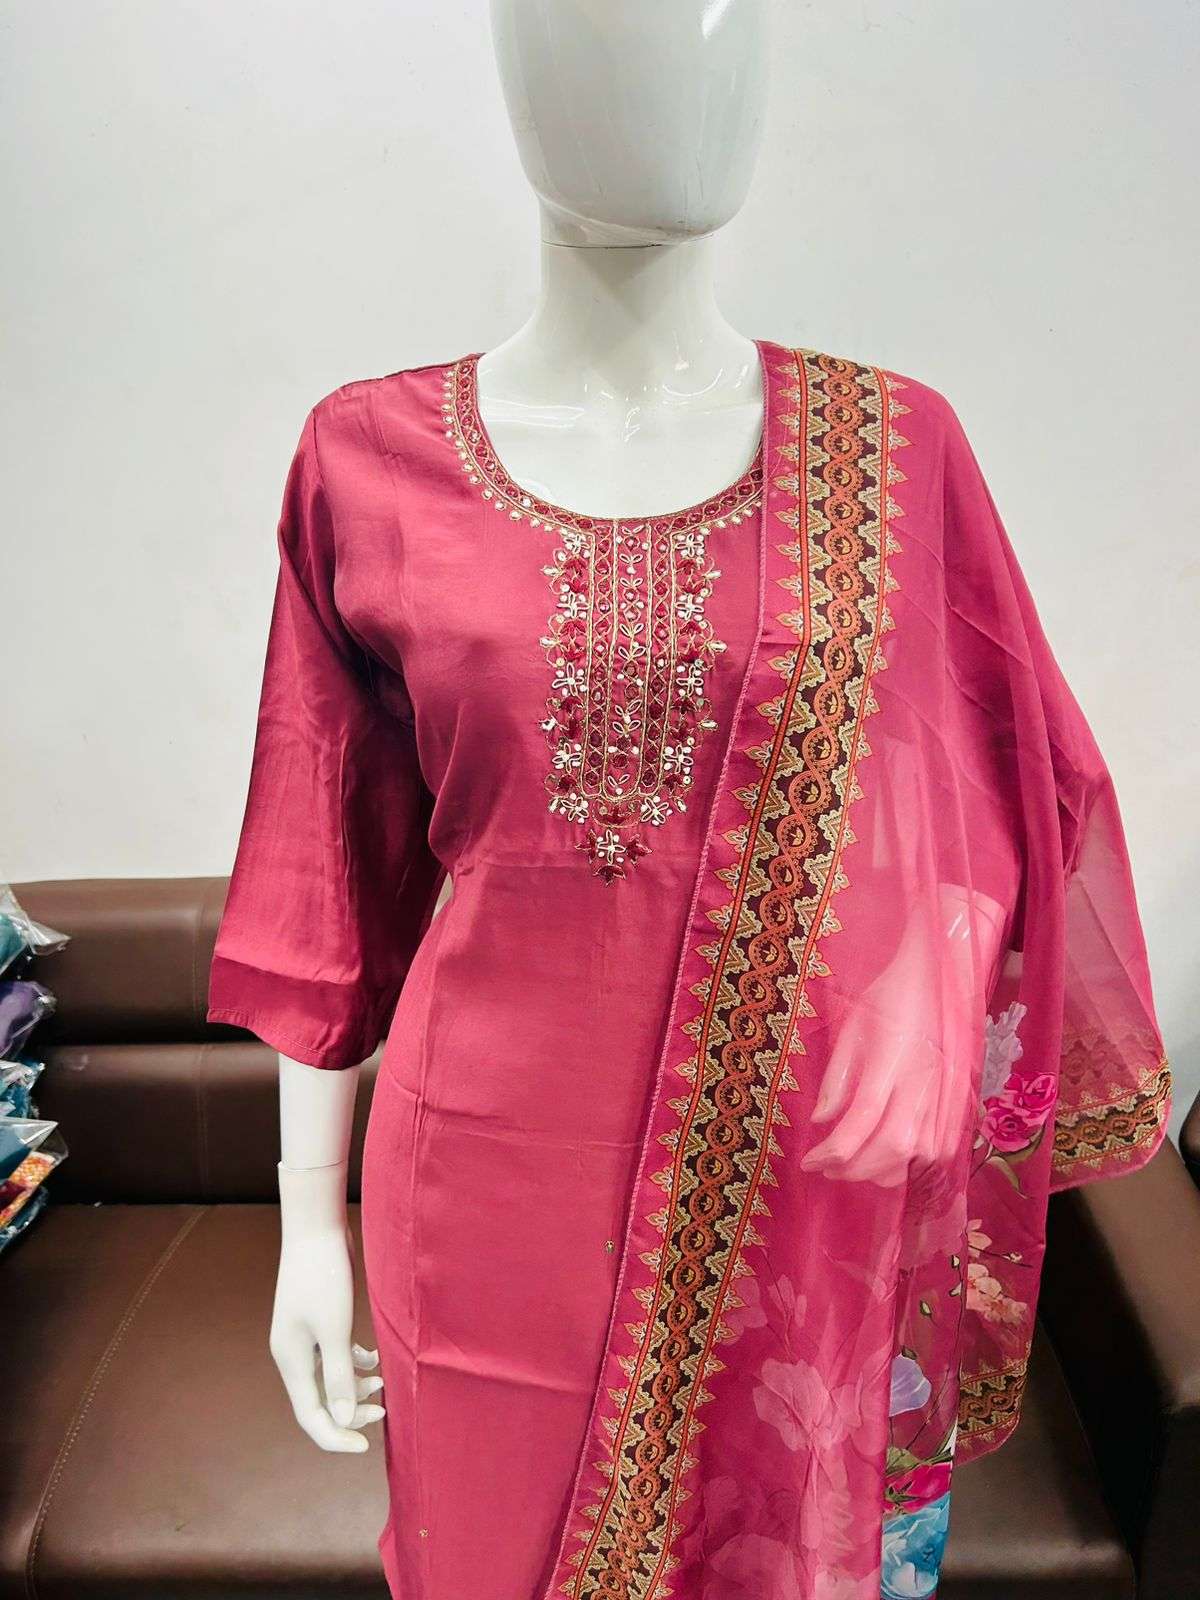 Specialization in Kameez and Kurti Designing - [DISHA] The Best Tailoring  School